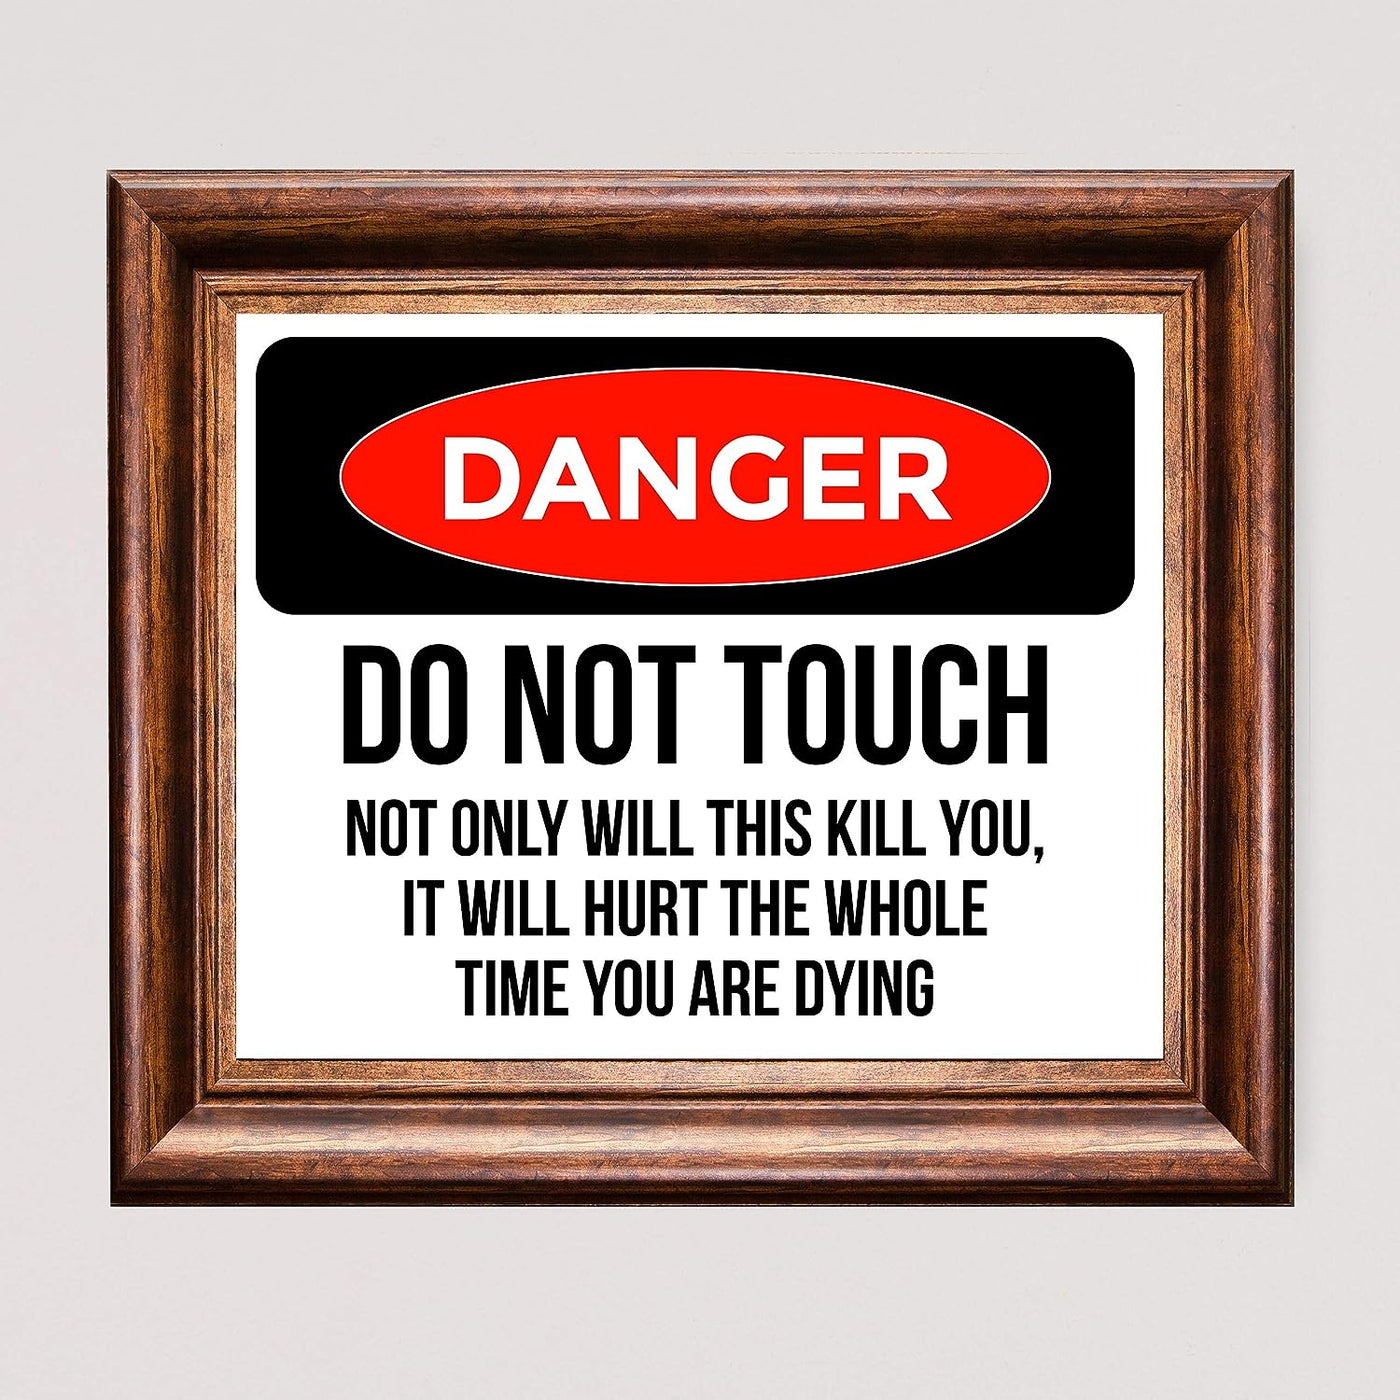 Danger-Do Not Touch-It Will Hurt Funny Wall Art Sign-10 x 8" Sarcastic Replica Warning Sign Print-Ready to Frame. Typographic Design. Humorous Decor for Home-Office-Shop-Bar-Cave. Fun Novelty Gift!